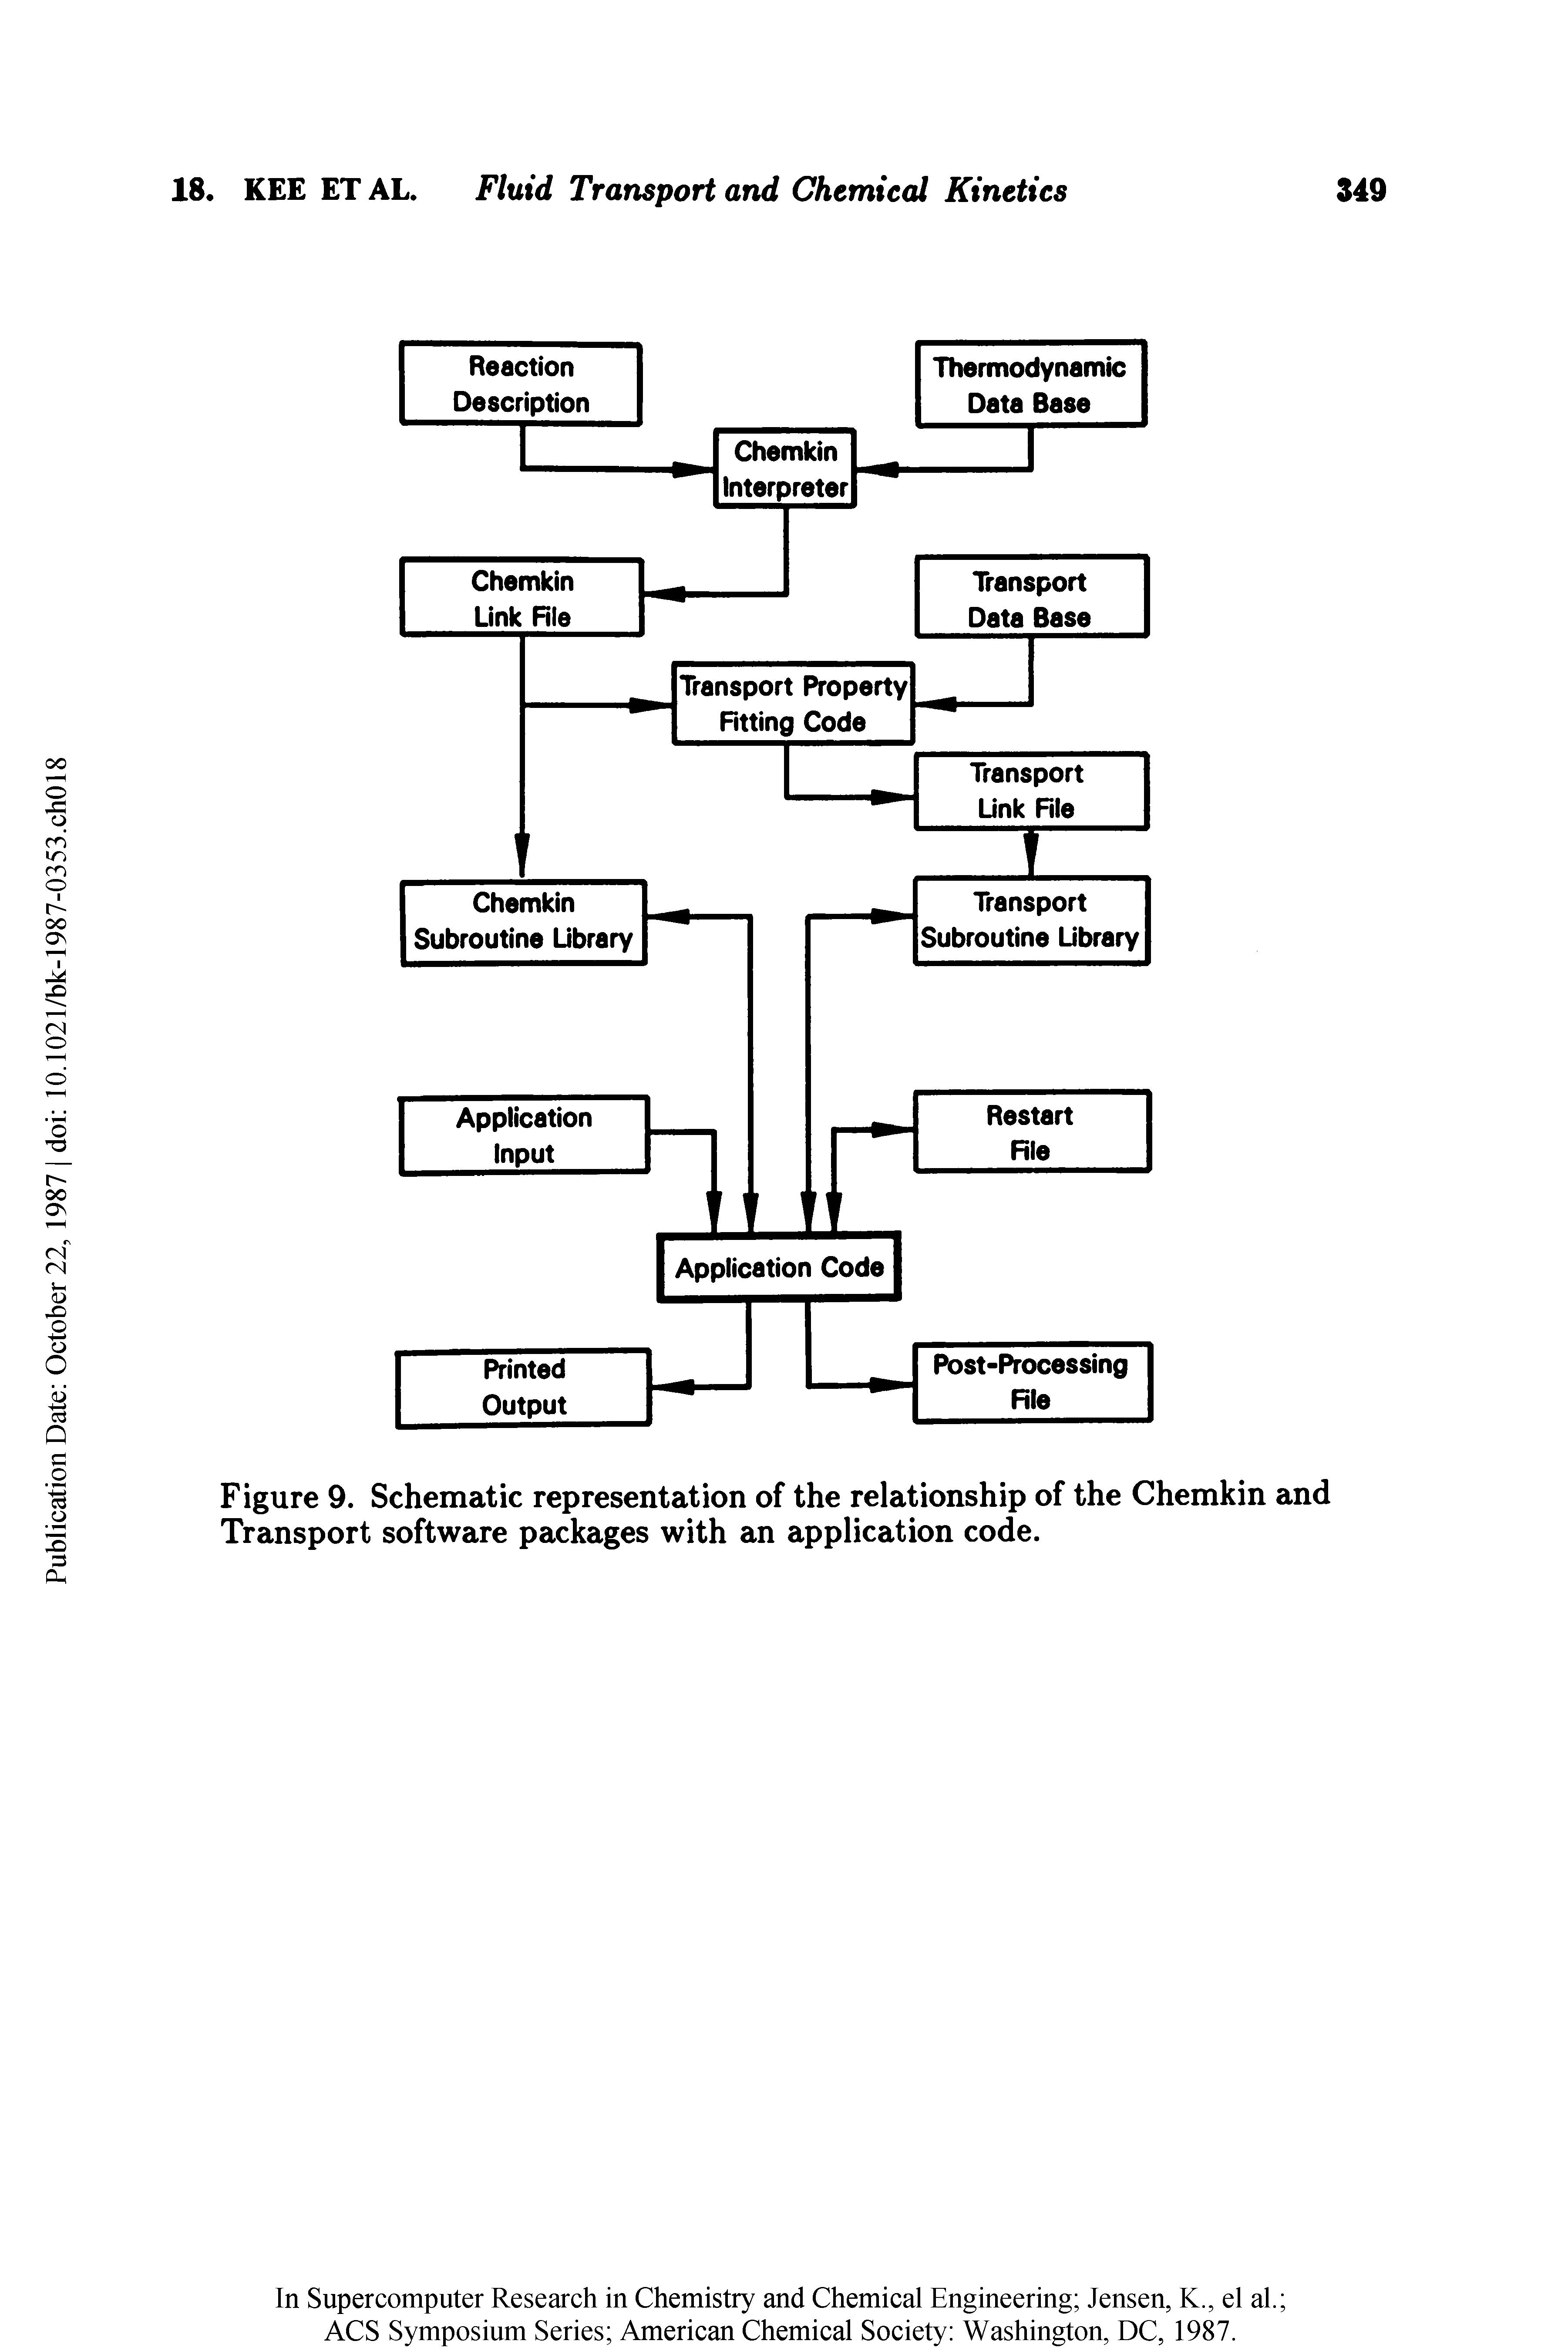 Figure 9. Schematic representation of the relationship of the Chemkin and Transport software packages with an application code.